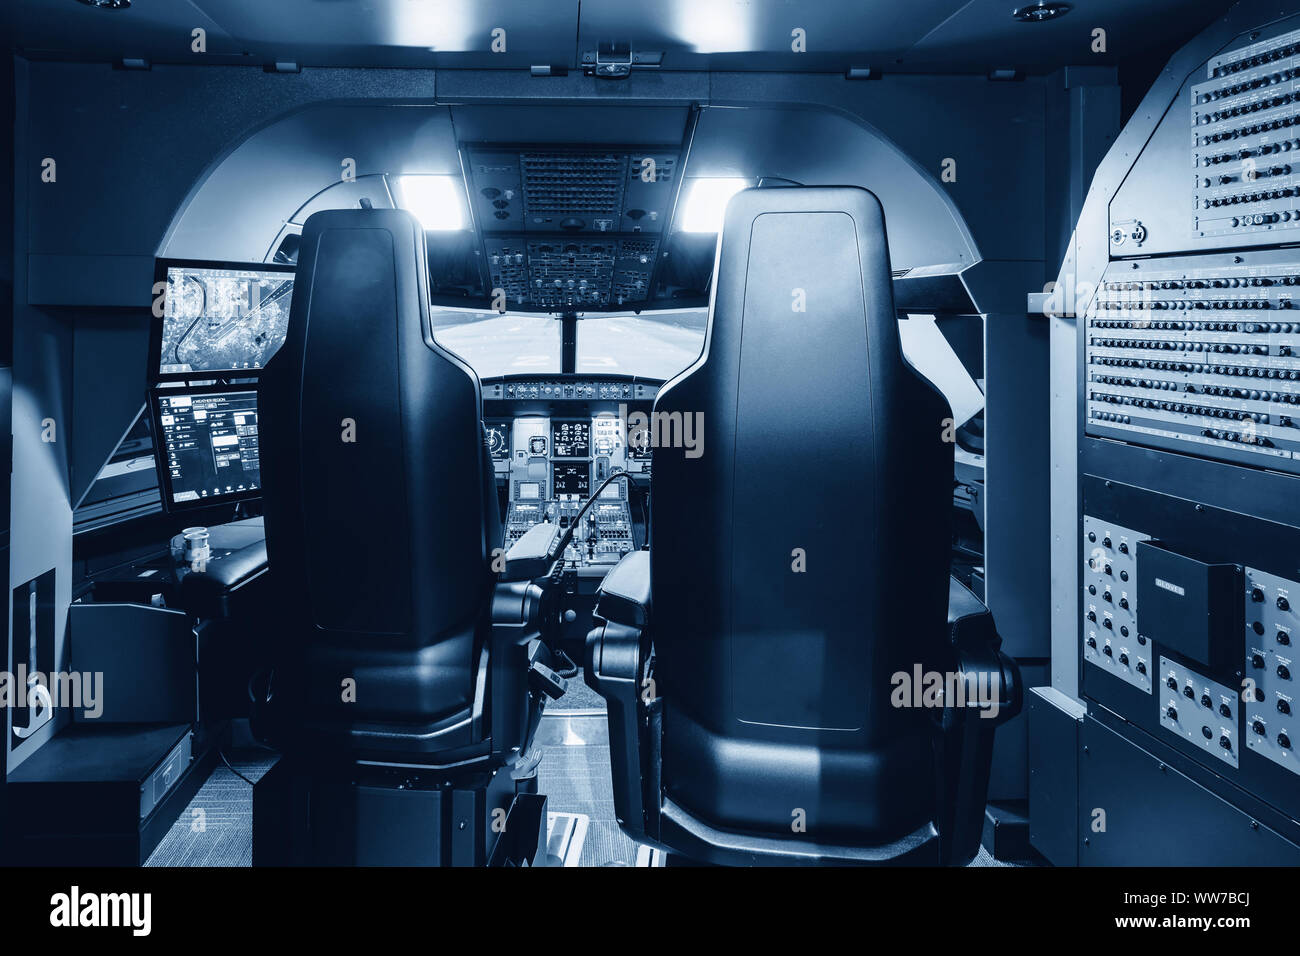 Cabin of a large airliner simulator. View of the cockpit and seats in the A320 airbus simulator. Stock Photo